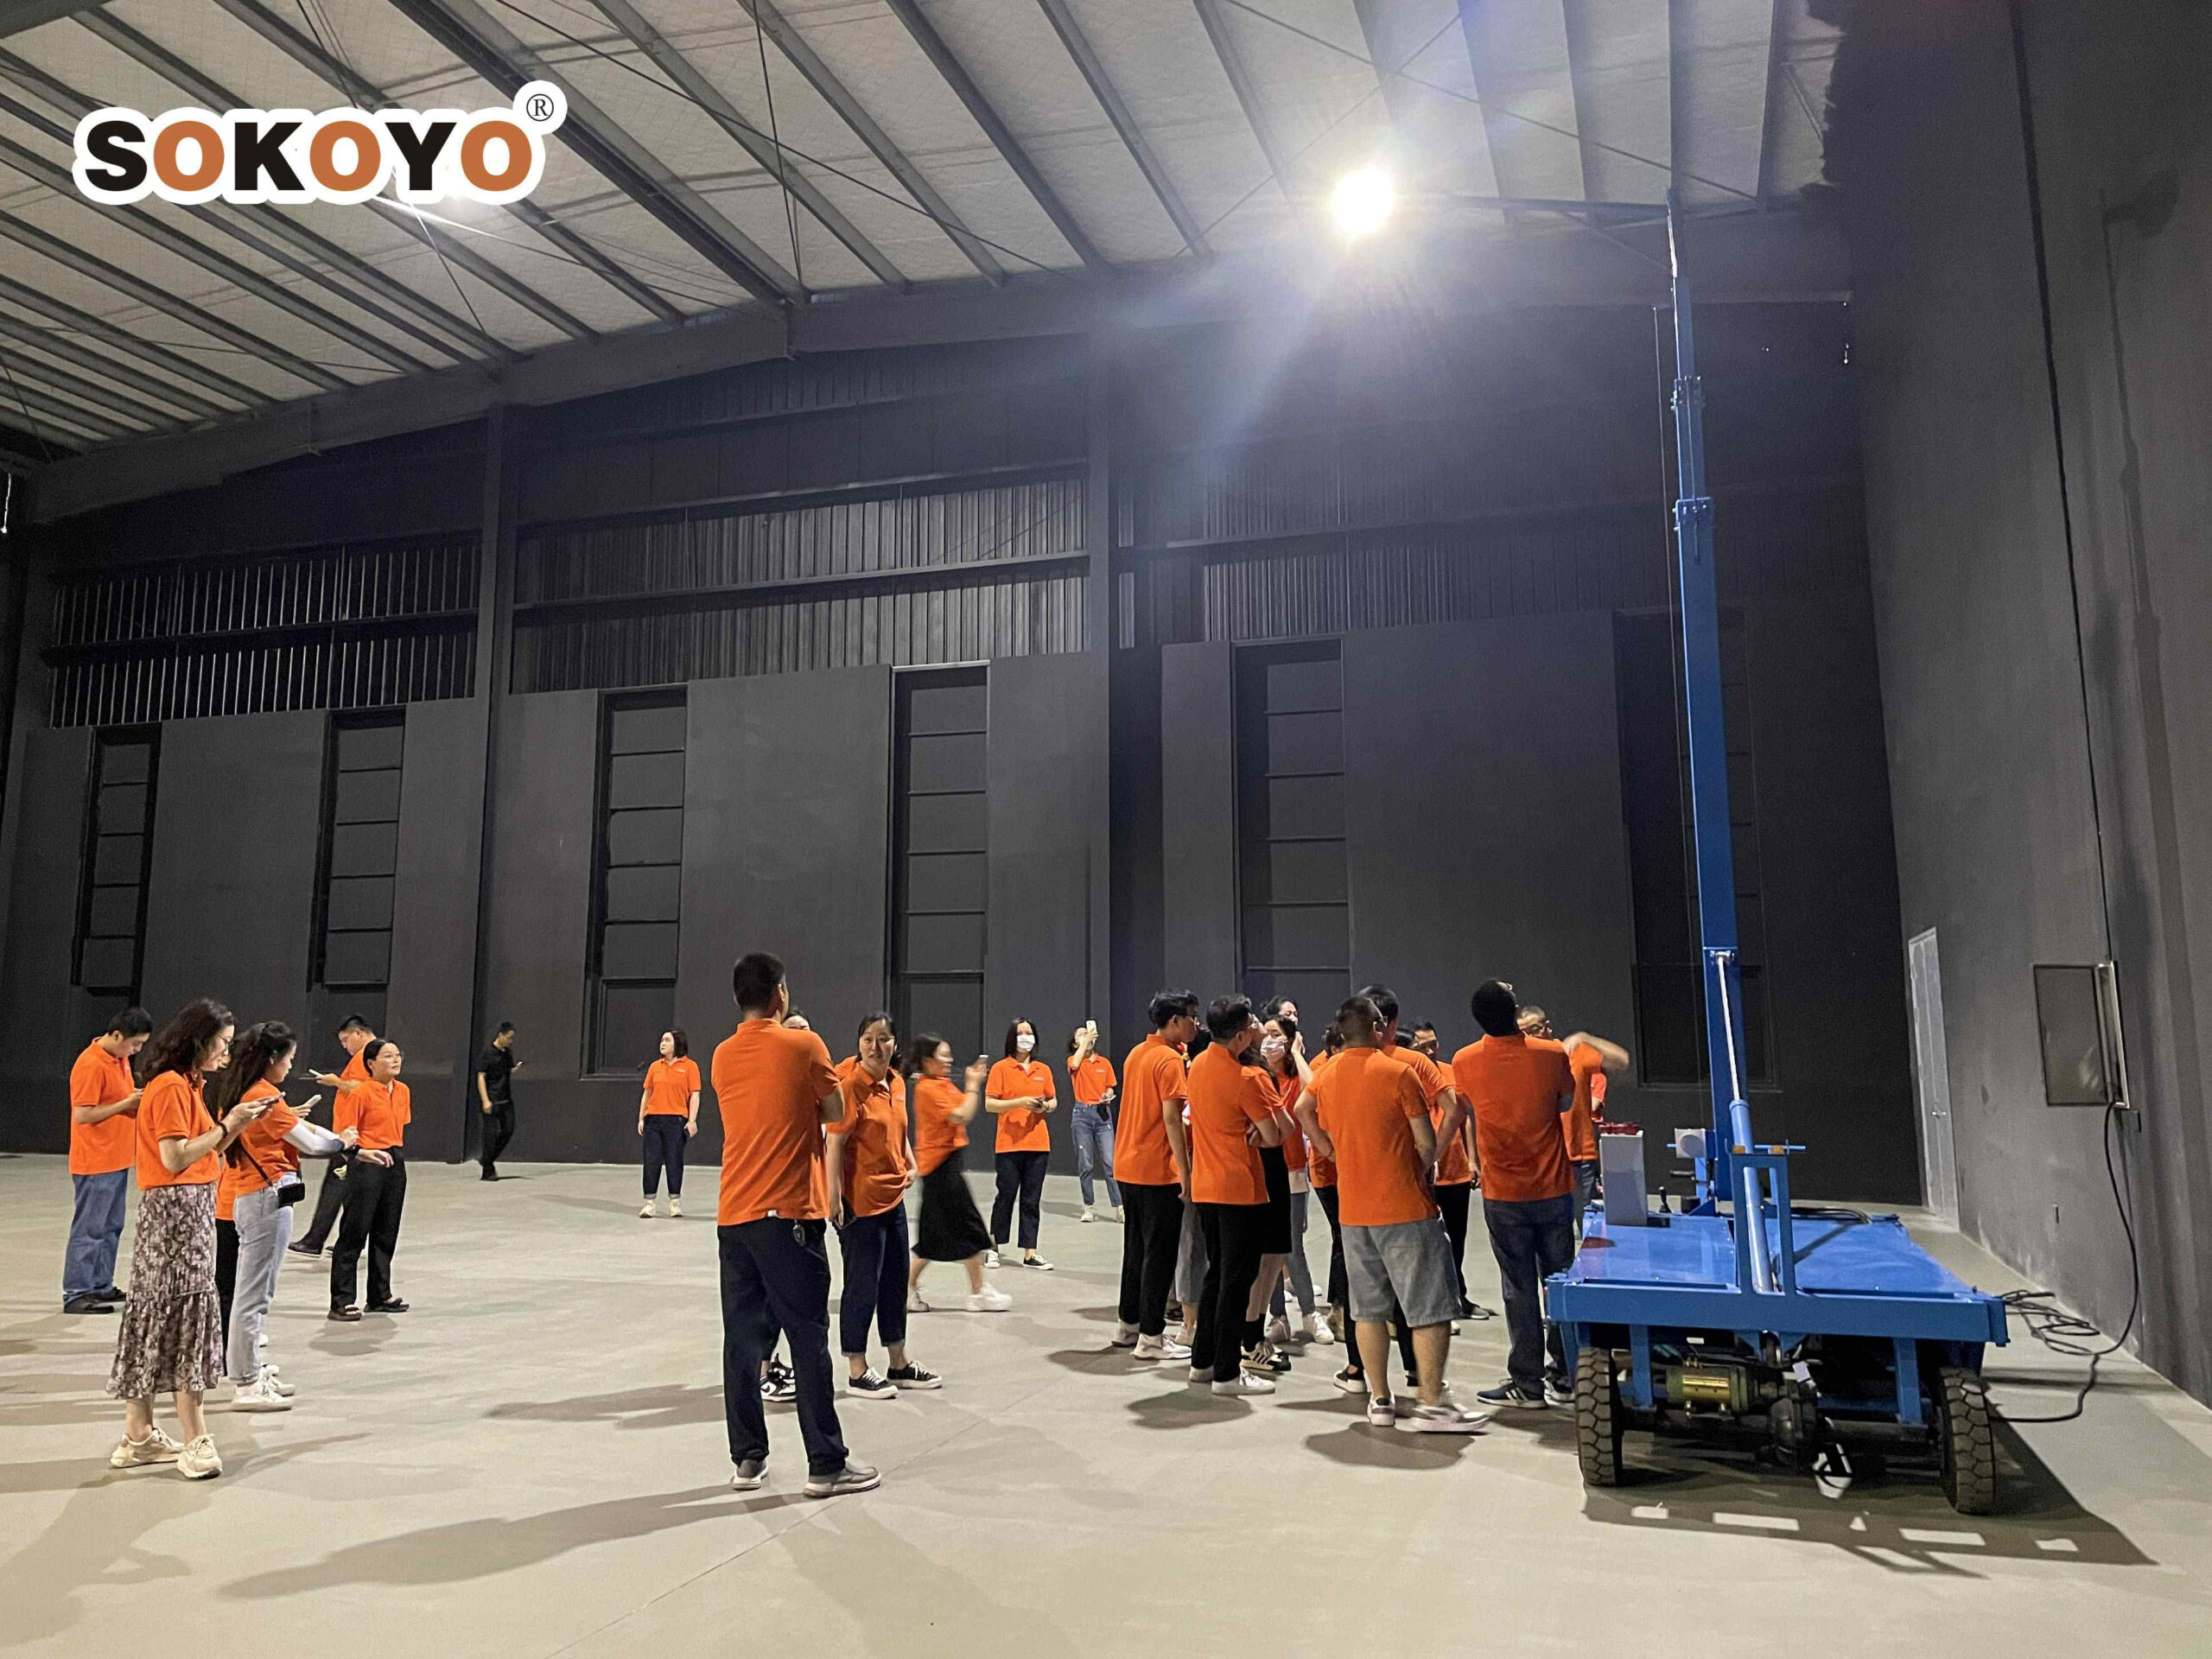 Factory workers in orange shirts gather around a blue piece of equipment in a spacious industrial facility illuminated by overhead lights